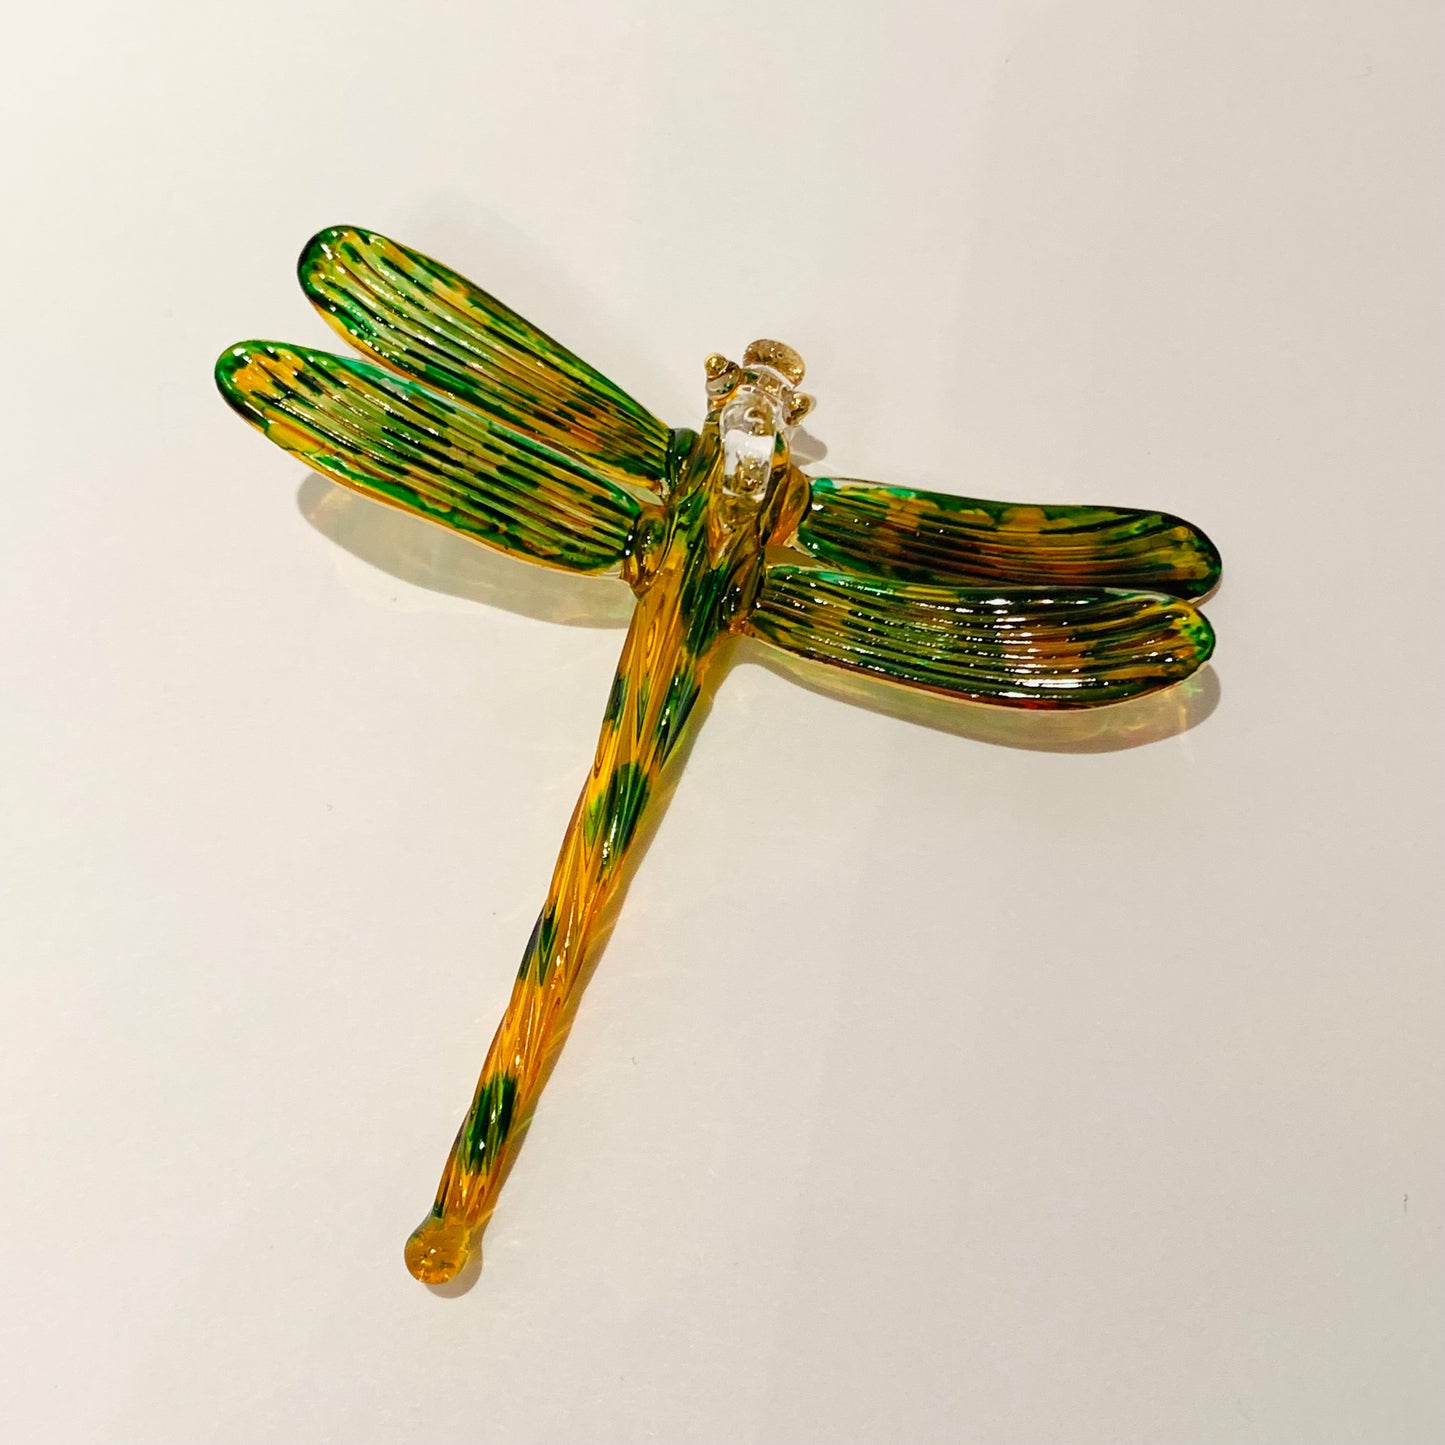 Blown Glass Ornament - Dragonfly Yellow & Green Variegated